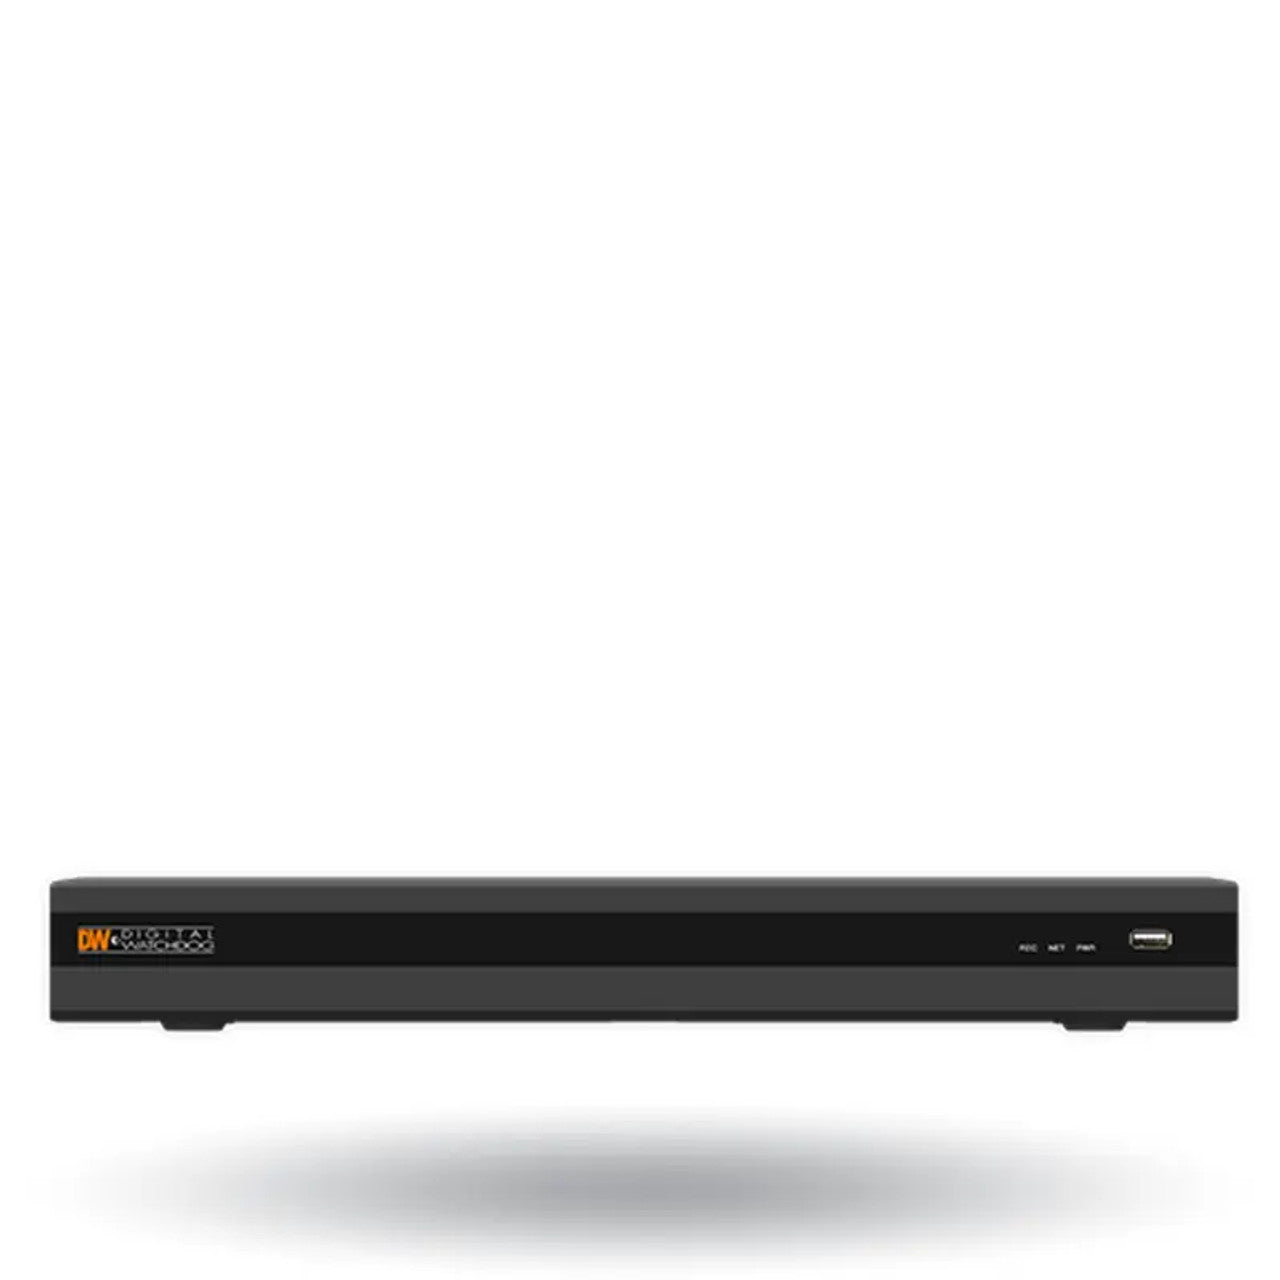 Digital Watchdog DW-VG4124T8P VMAX IP G4 8 Channel PoE NVR with 4 bonus channels with 4TB Hard Drive, 12-Channel